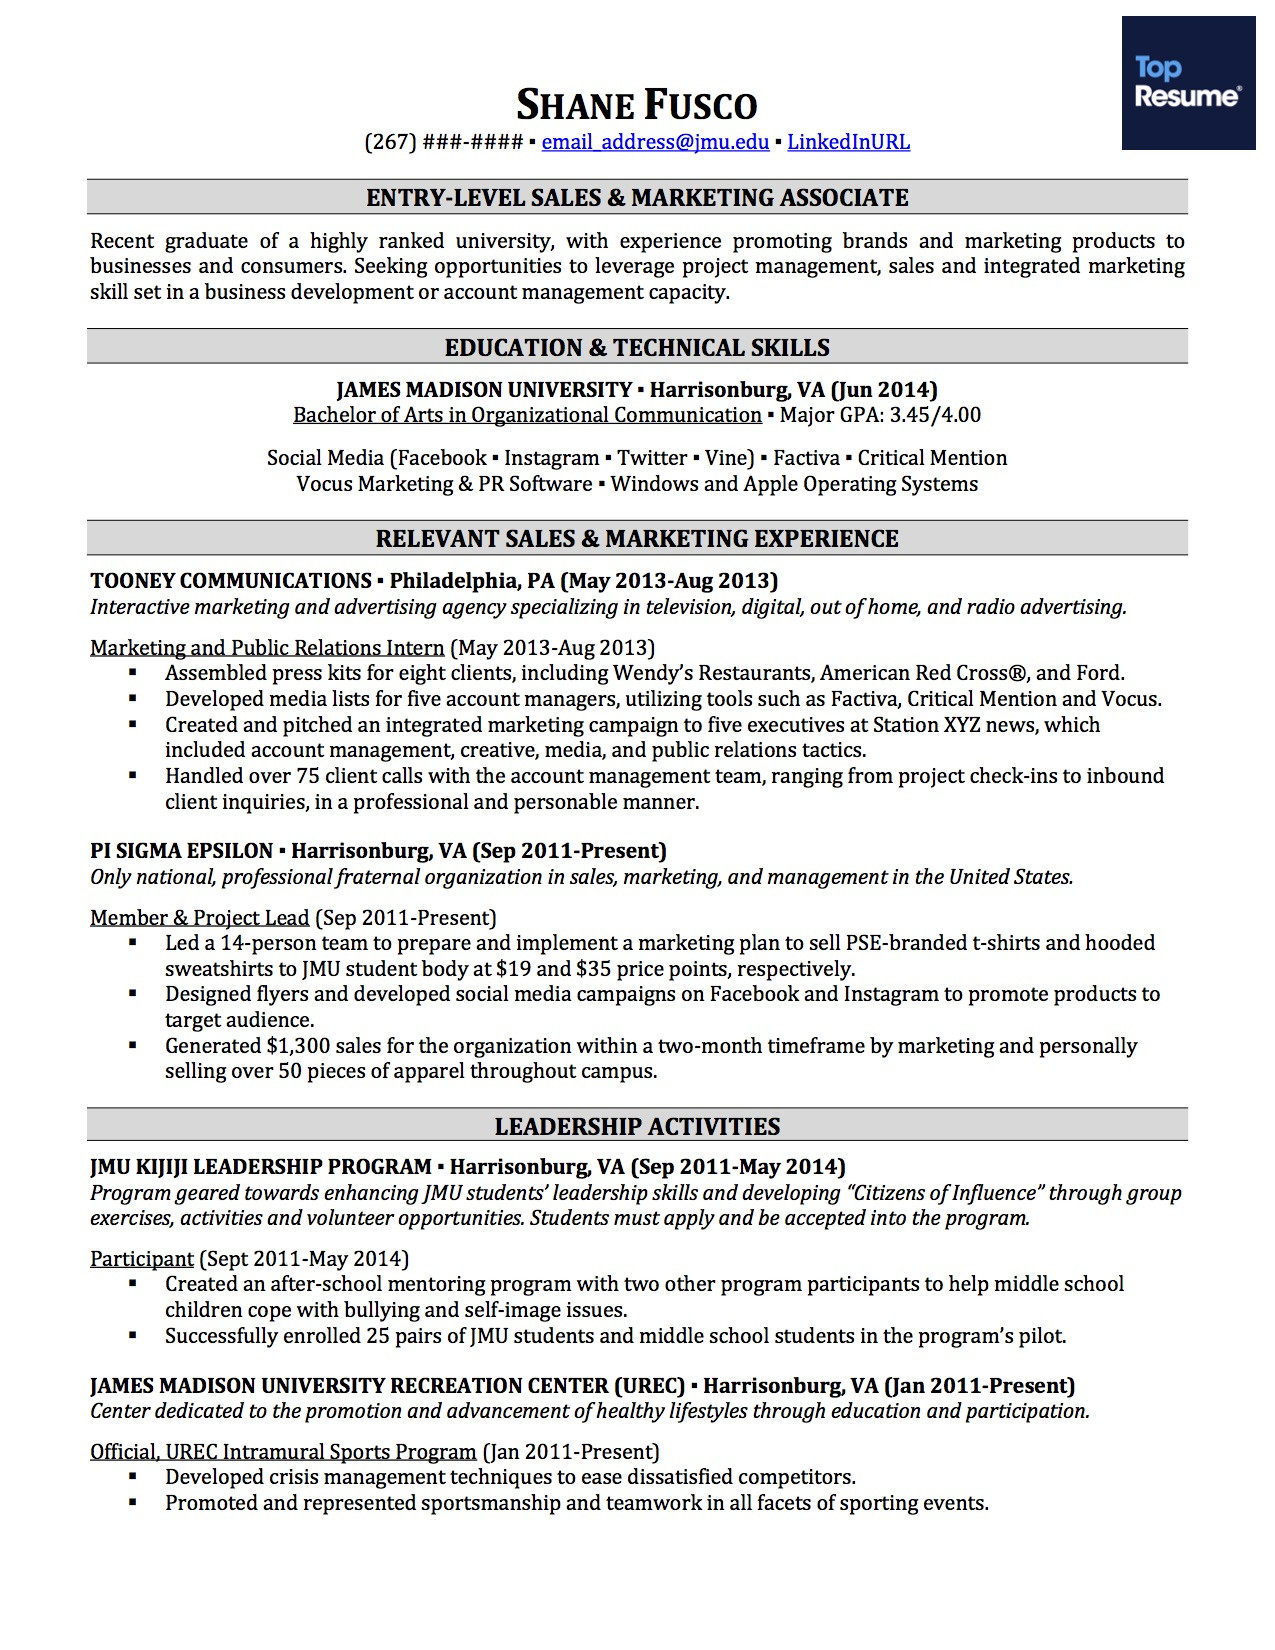 Sample Resume with No College Degree How to Make A Great Resume with No Experience topresume